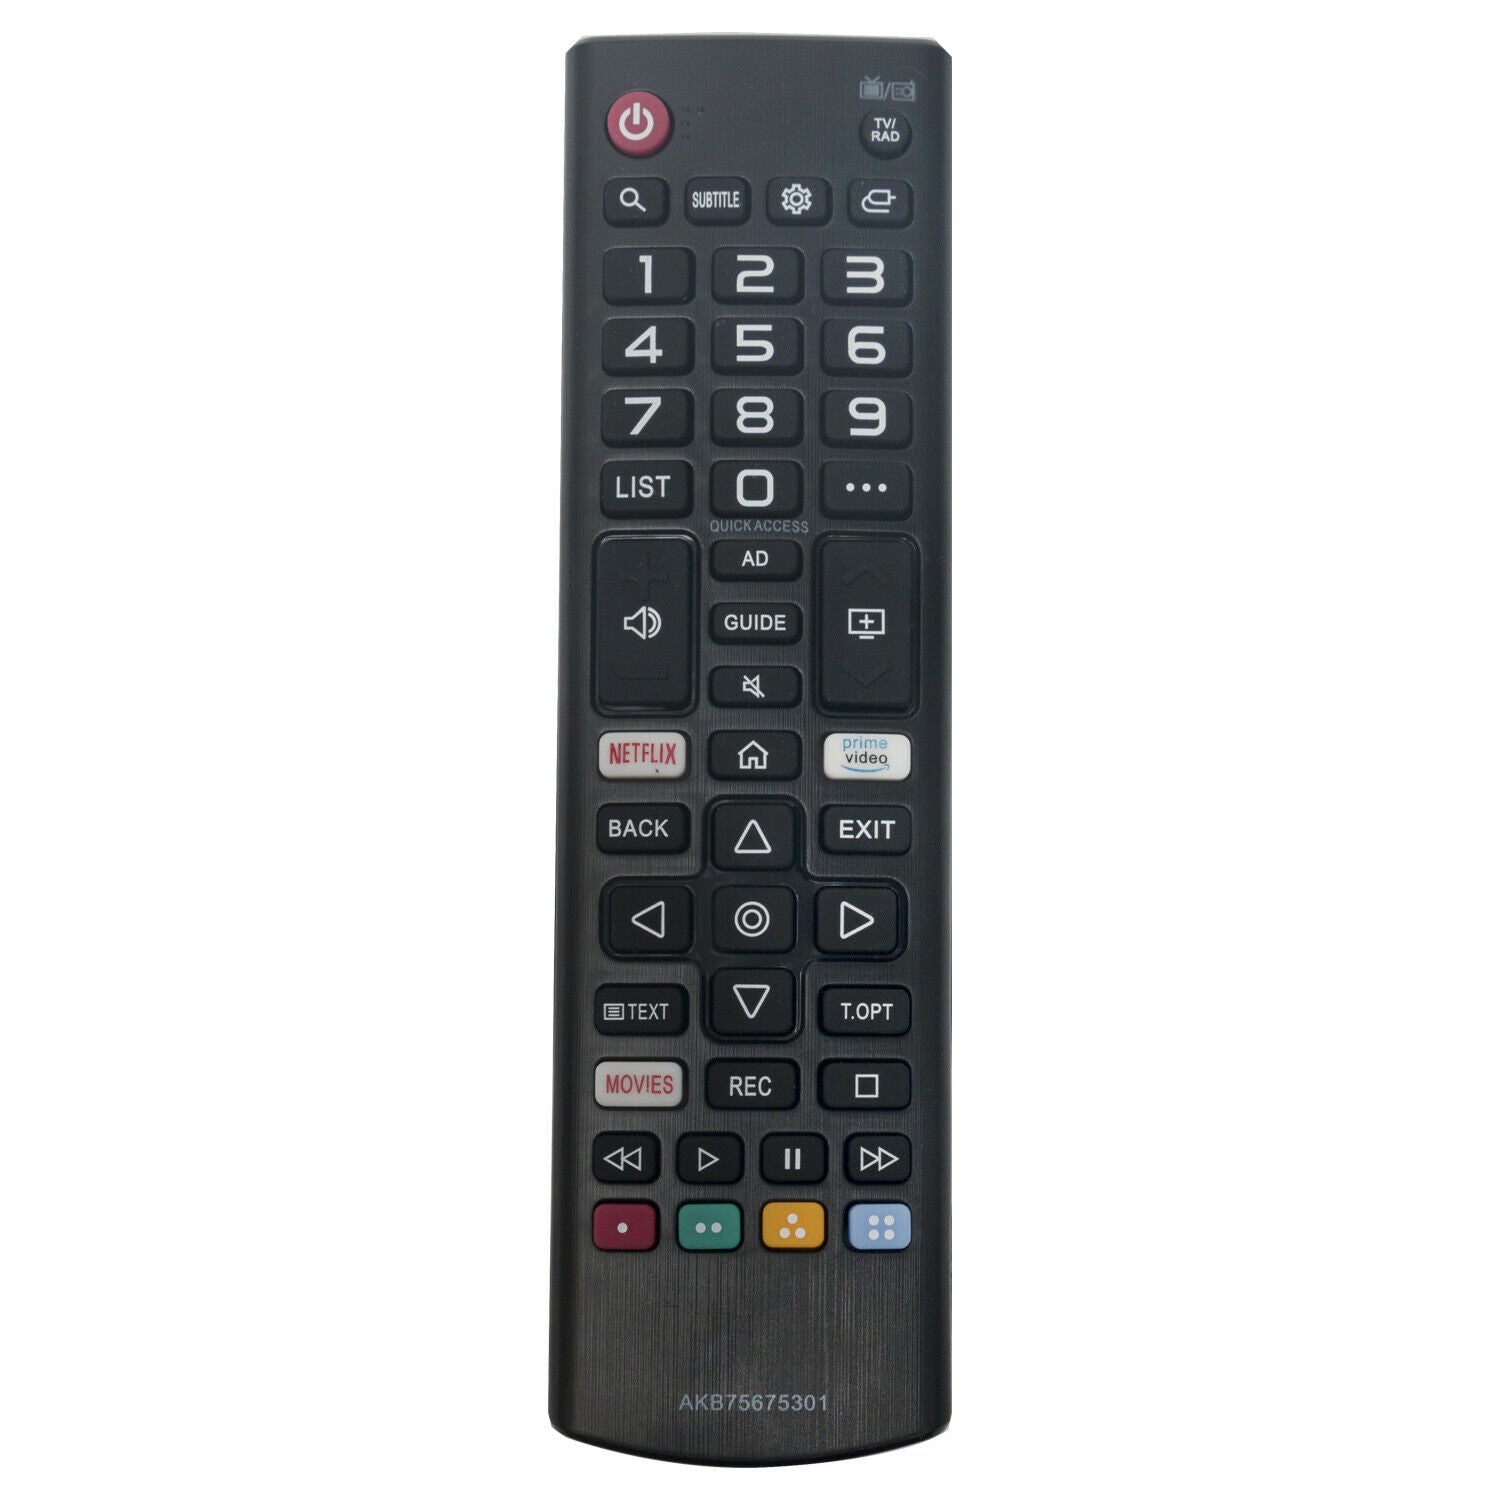 AKB75675301 Remote Replacement for LG TVs 32LM6300PLA with Netflix Primevideo